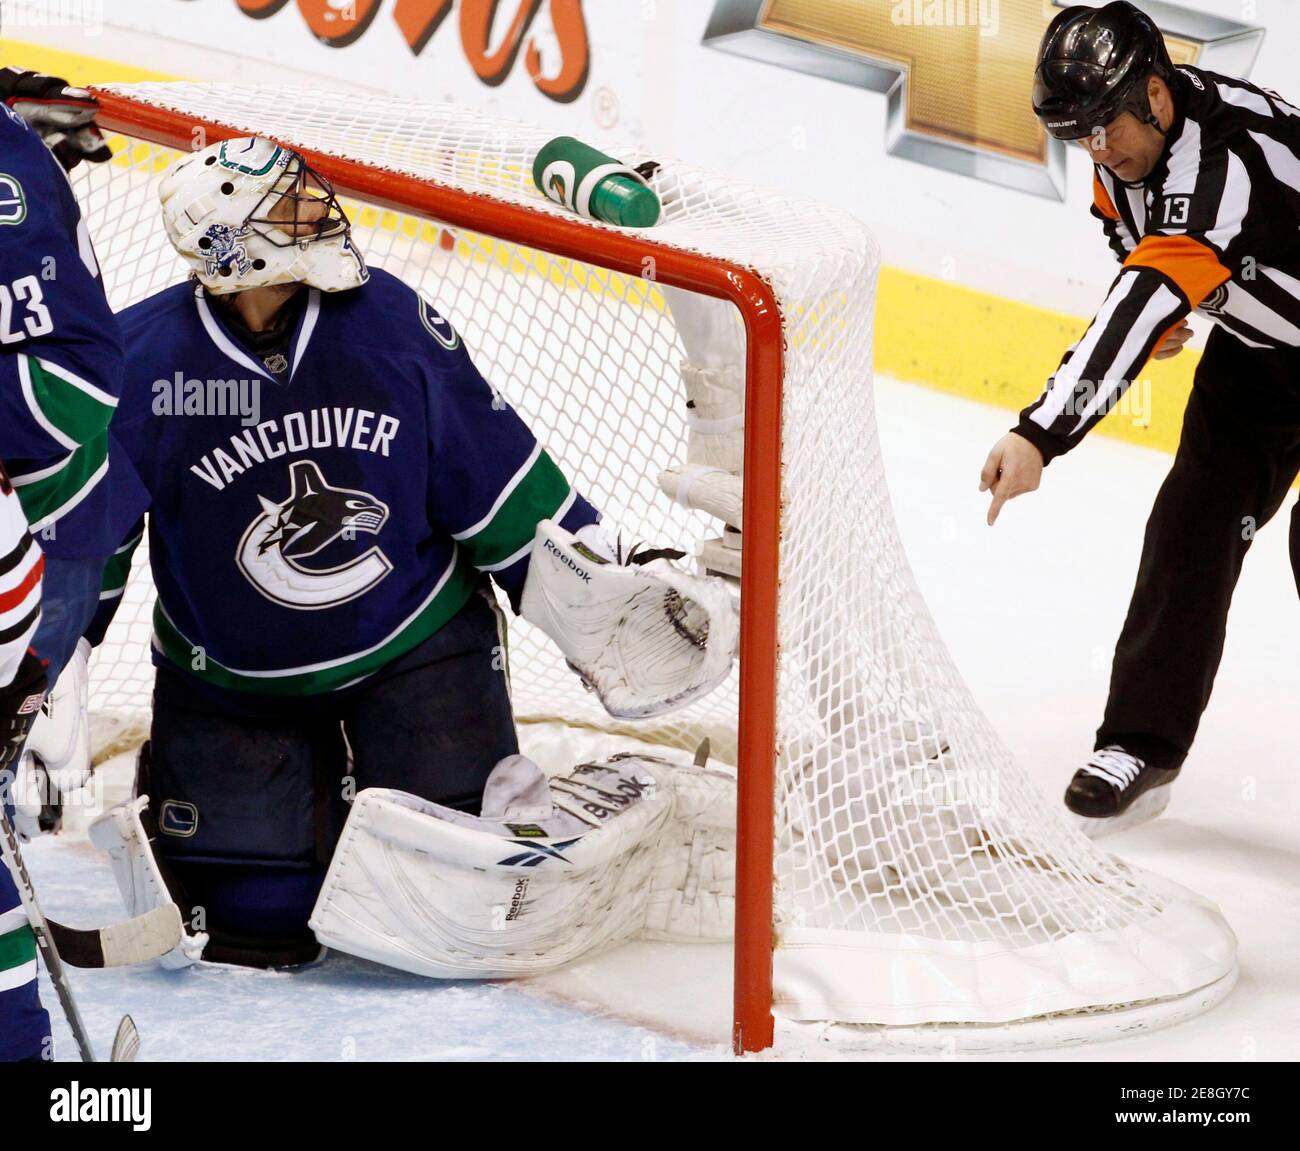 Vancouver Canucks goalie Roberto Luongo looks back at referee Dan O'Halloran who signals a Chicago Blackhawks goal in the third period during Game 3 of their NHL Western Conference semi-final hockey game in Vancouver, British Columbia May 5, 2010. REUTERS/Andy Clark (CANADA - Tags: SPORT ICE HOCKEY) Stock Photo